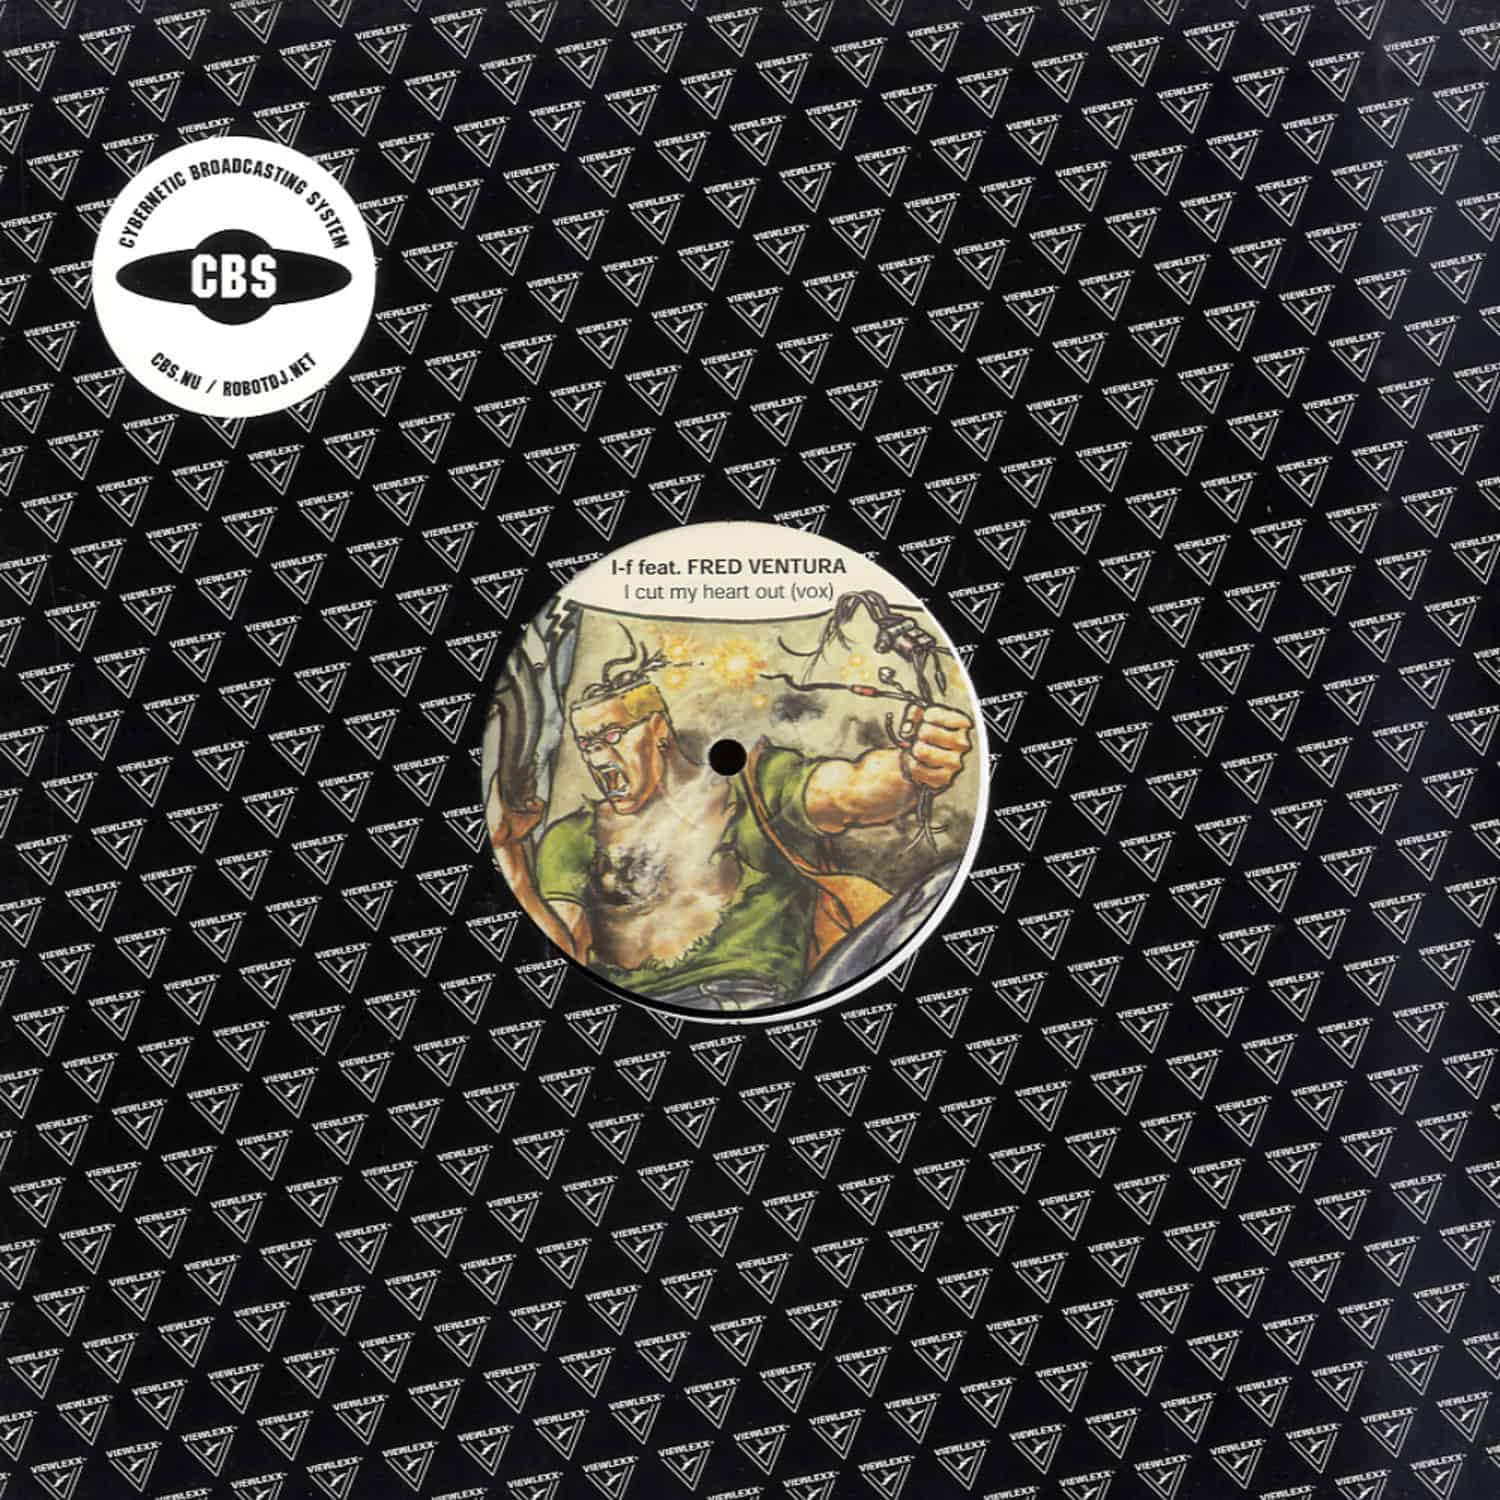 Mat 101 / Legowelt / I-f ft. Fred Ventura - WE STILL KILL THE OLD WAY - THE DOUBLE DOUBLE CROSS